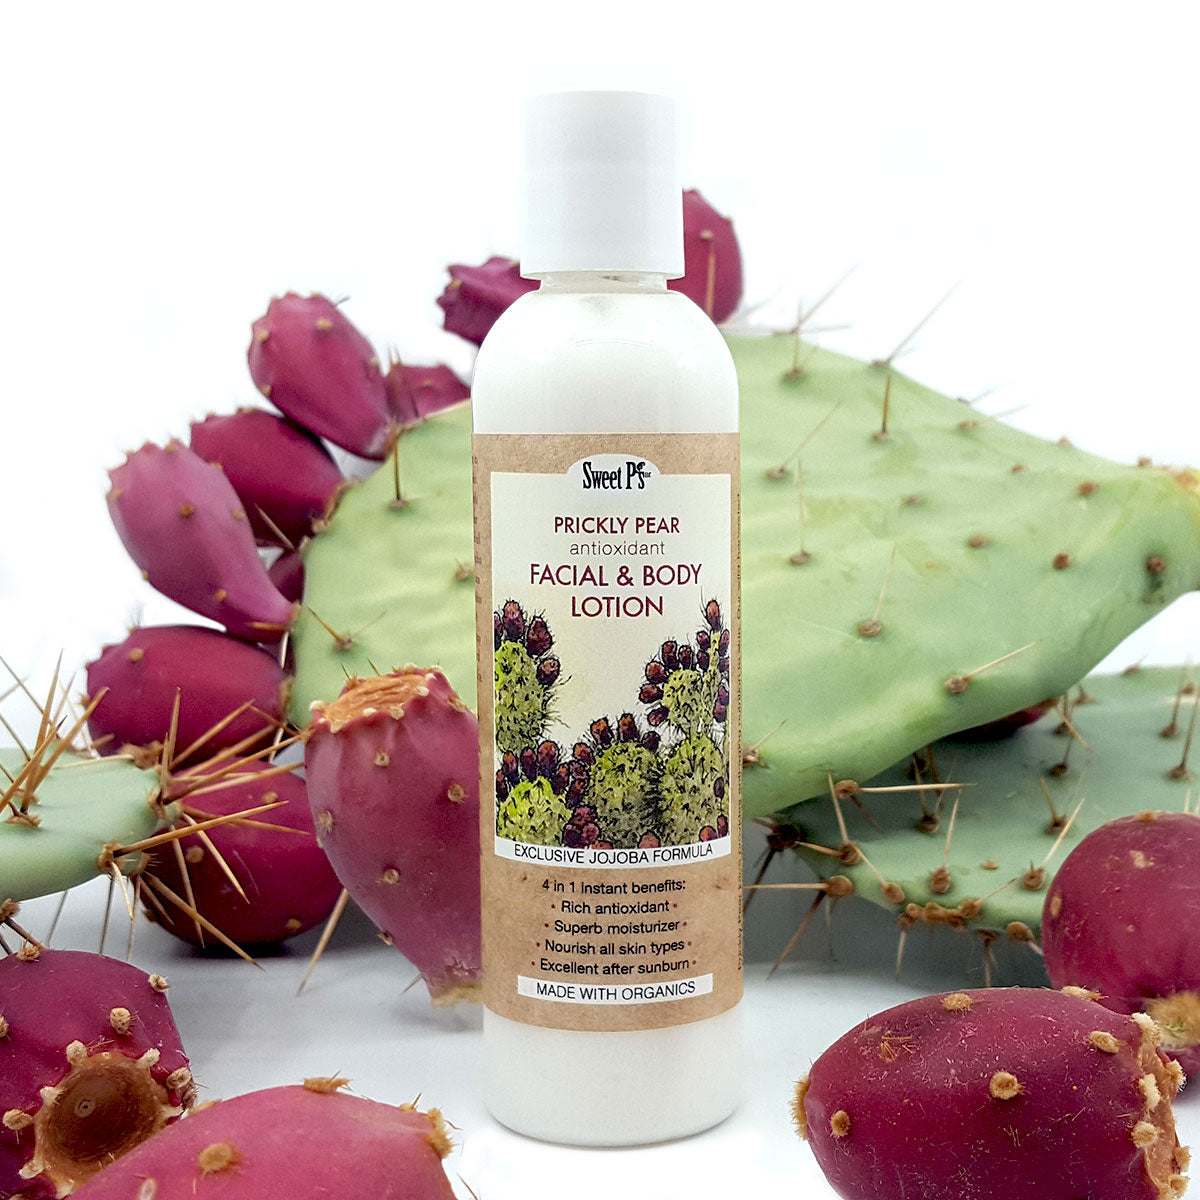 Super rich antioxidant and moisturizer, no added fragrance Jojoba rich moisturizer for face and body Prickly pear juice promotes optimal cellular health Helps protect skin from free radicals Excellent as an after sun treatment or sunburn Ingredients: Wild crafted Opuntia engelmanni (prickly pear juice), organic Simmondsia chinensis (jojoba oil), stearic acid, emulsifying wax, xanthan gum, vegetable glycerin, benzyl alcohol and dehydroacetic acid 4 oz. Bottle